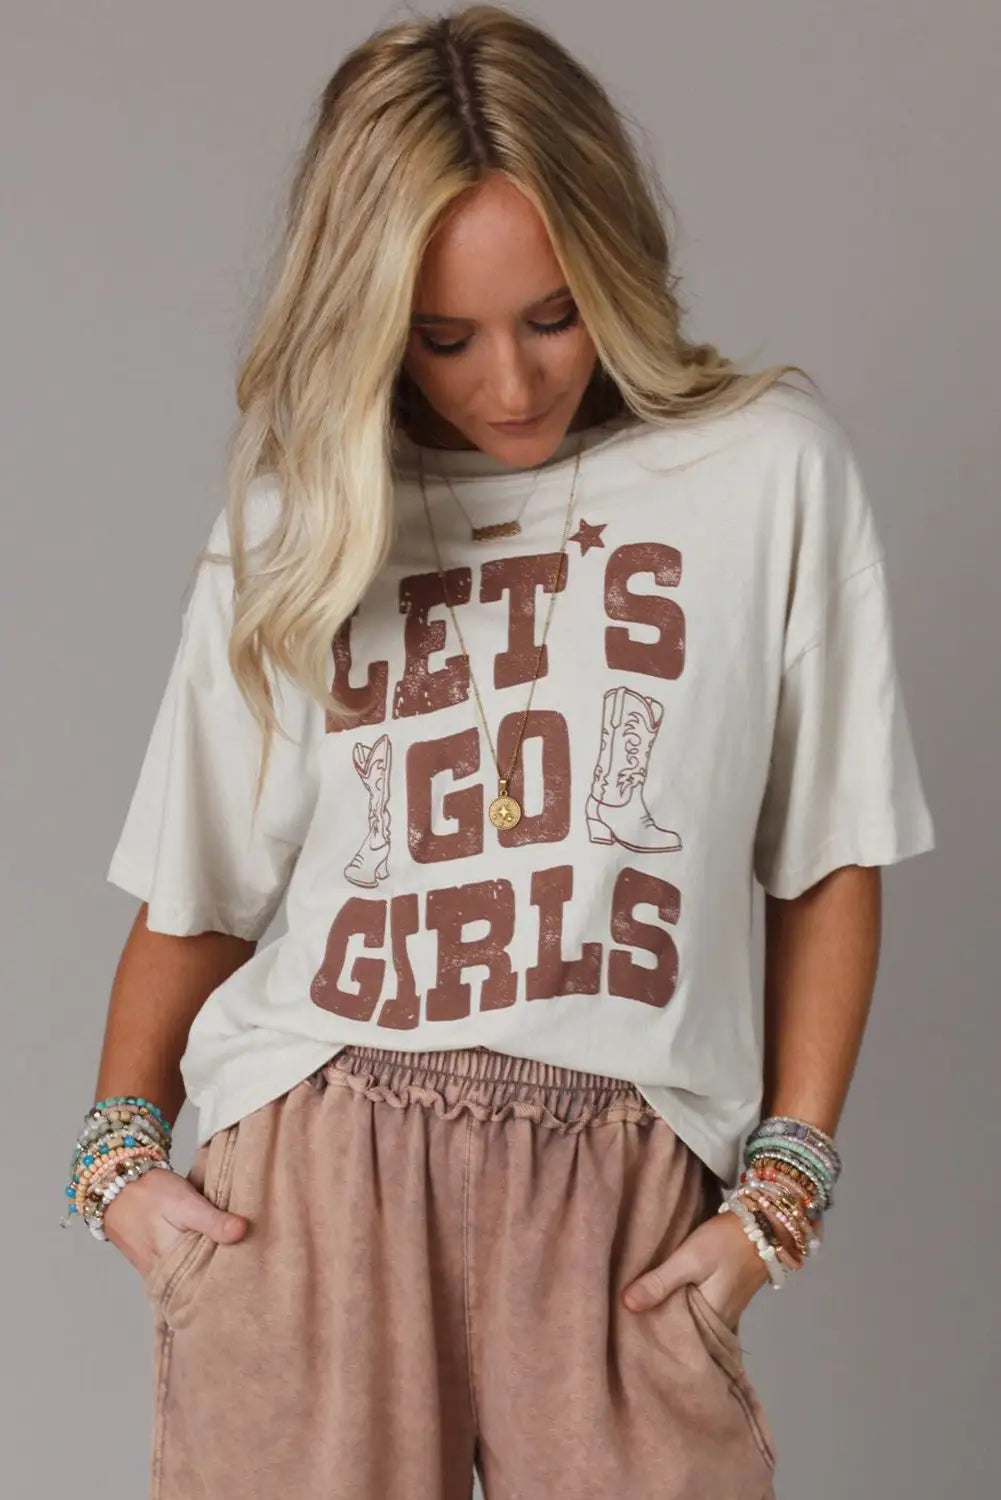 White lets go girls western boots tee - t-shirts